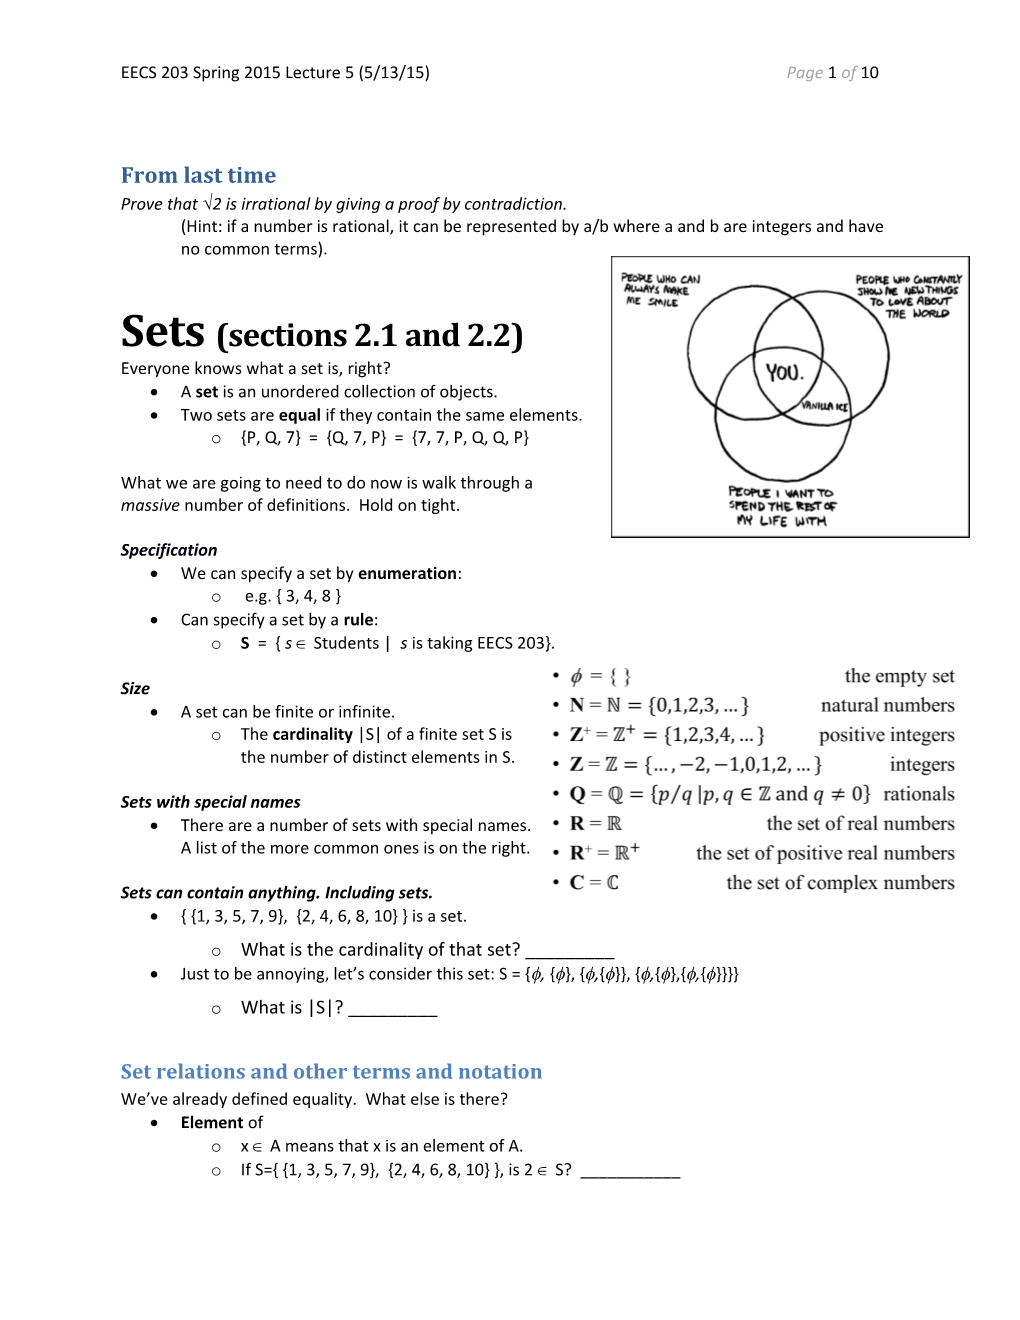 EECS 203 Spring 2015 Lecture 5 (5/13/15) Page 1 of 8